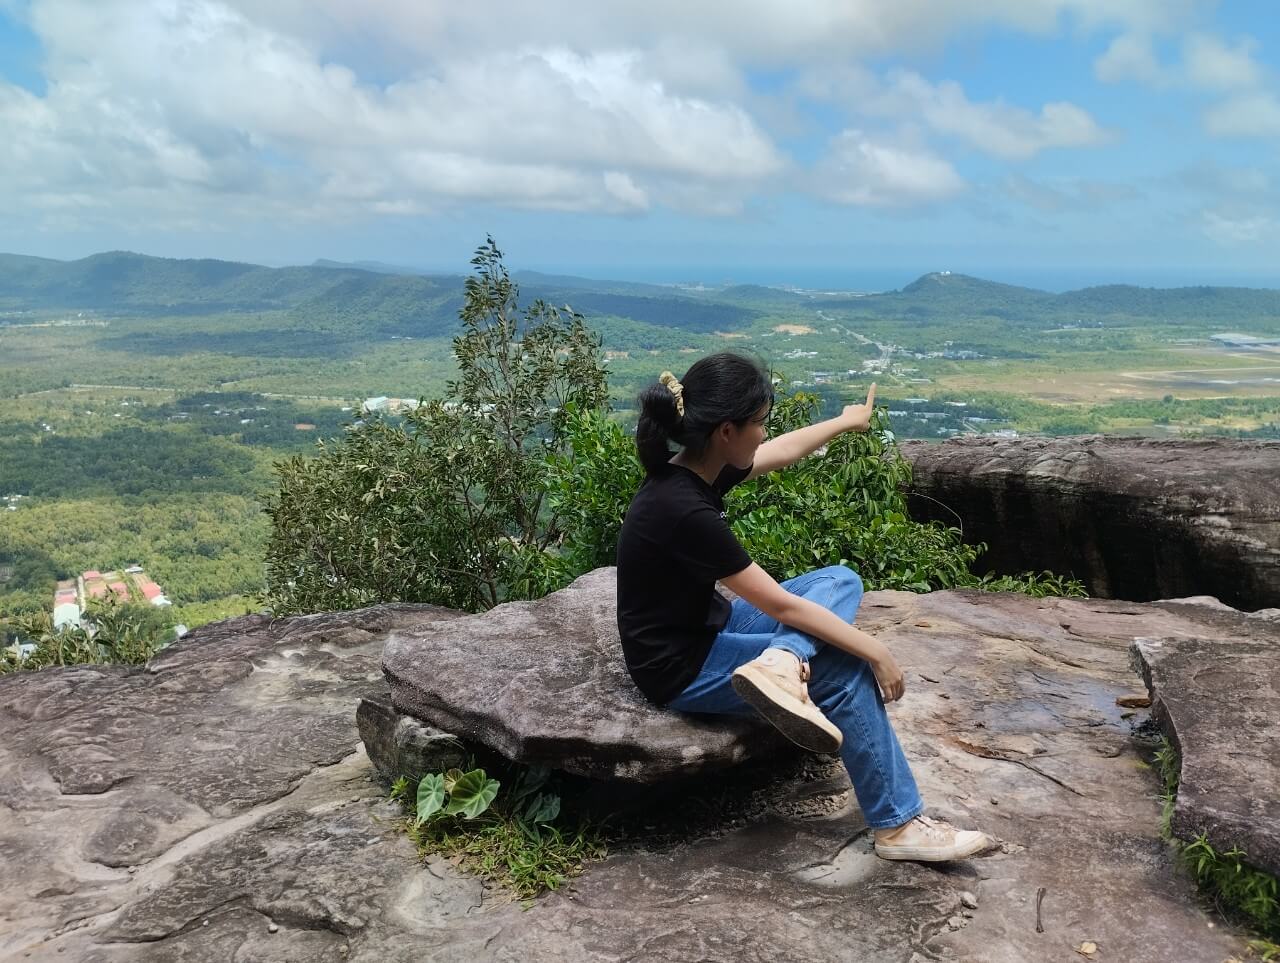 Tien Son Dinh, the Fairy Mountain Peak of breathtaking scenery worth your visit in Phu Quoc island